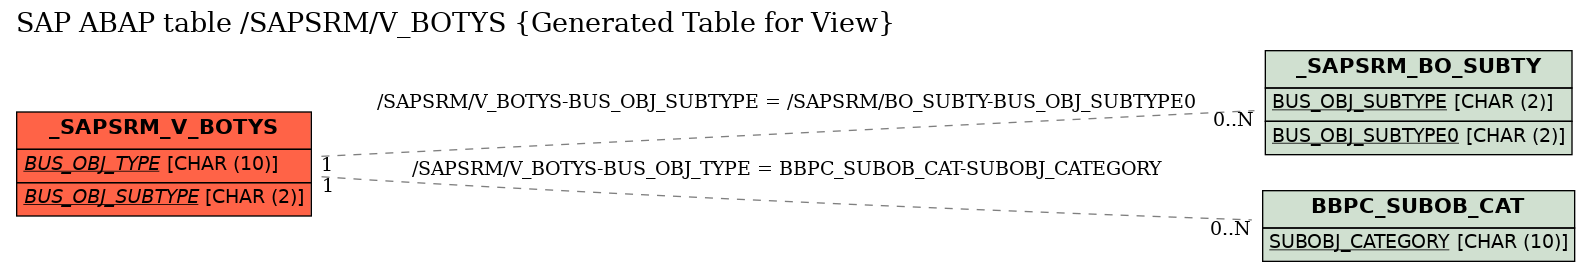 E-R Diagram for table /SAPSRM/V_BOTYS (Generated Table for View)